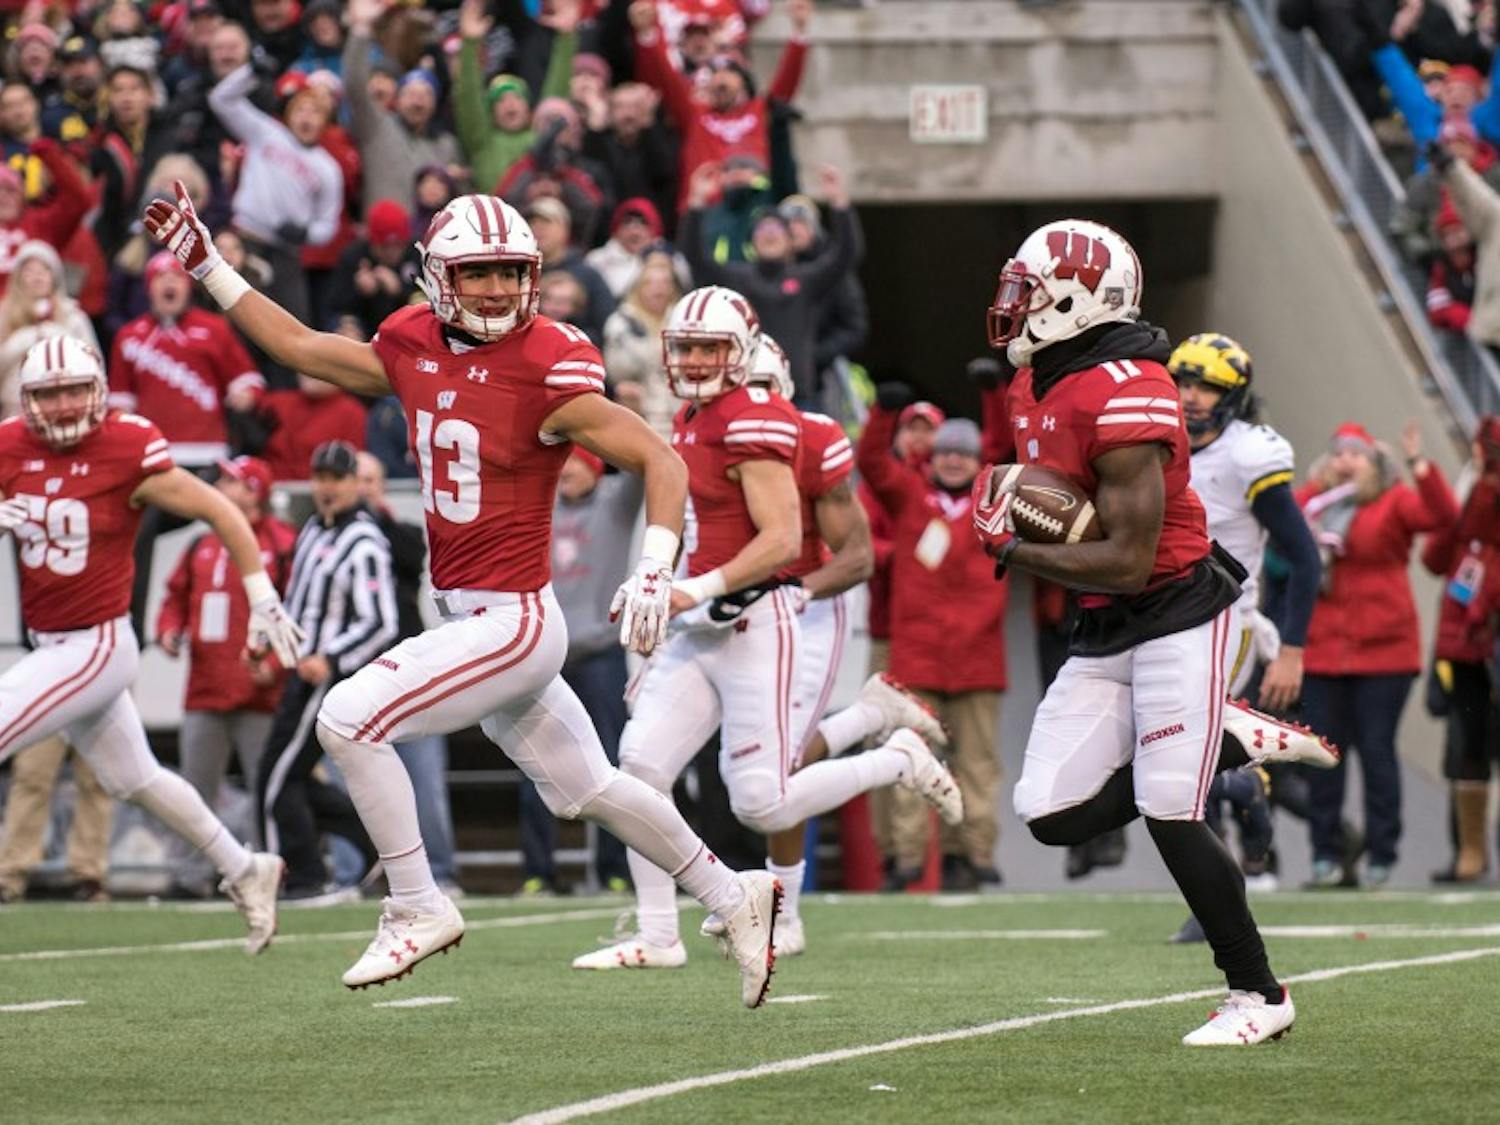 The Badgers still have a chance, albeit a small one, to make the College Football Playoff